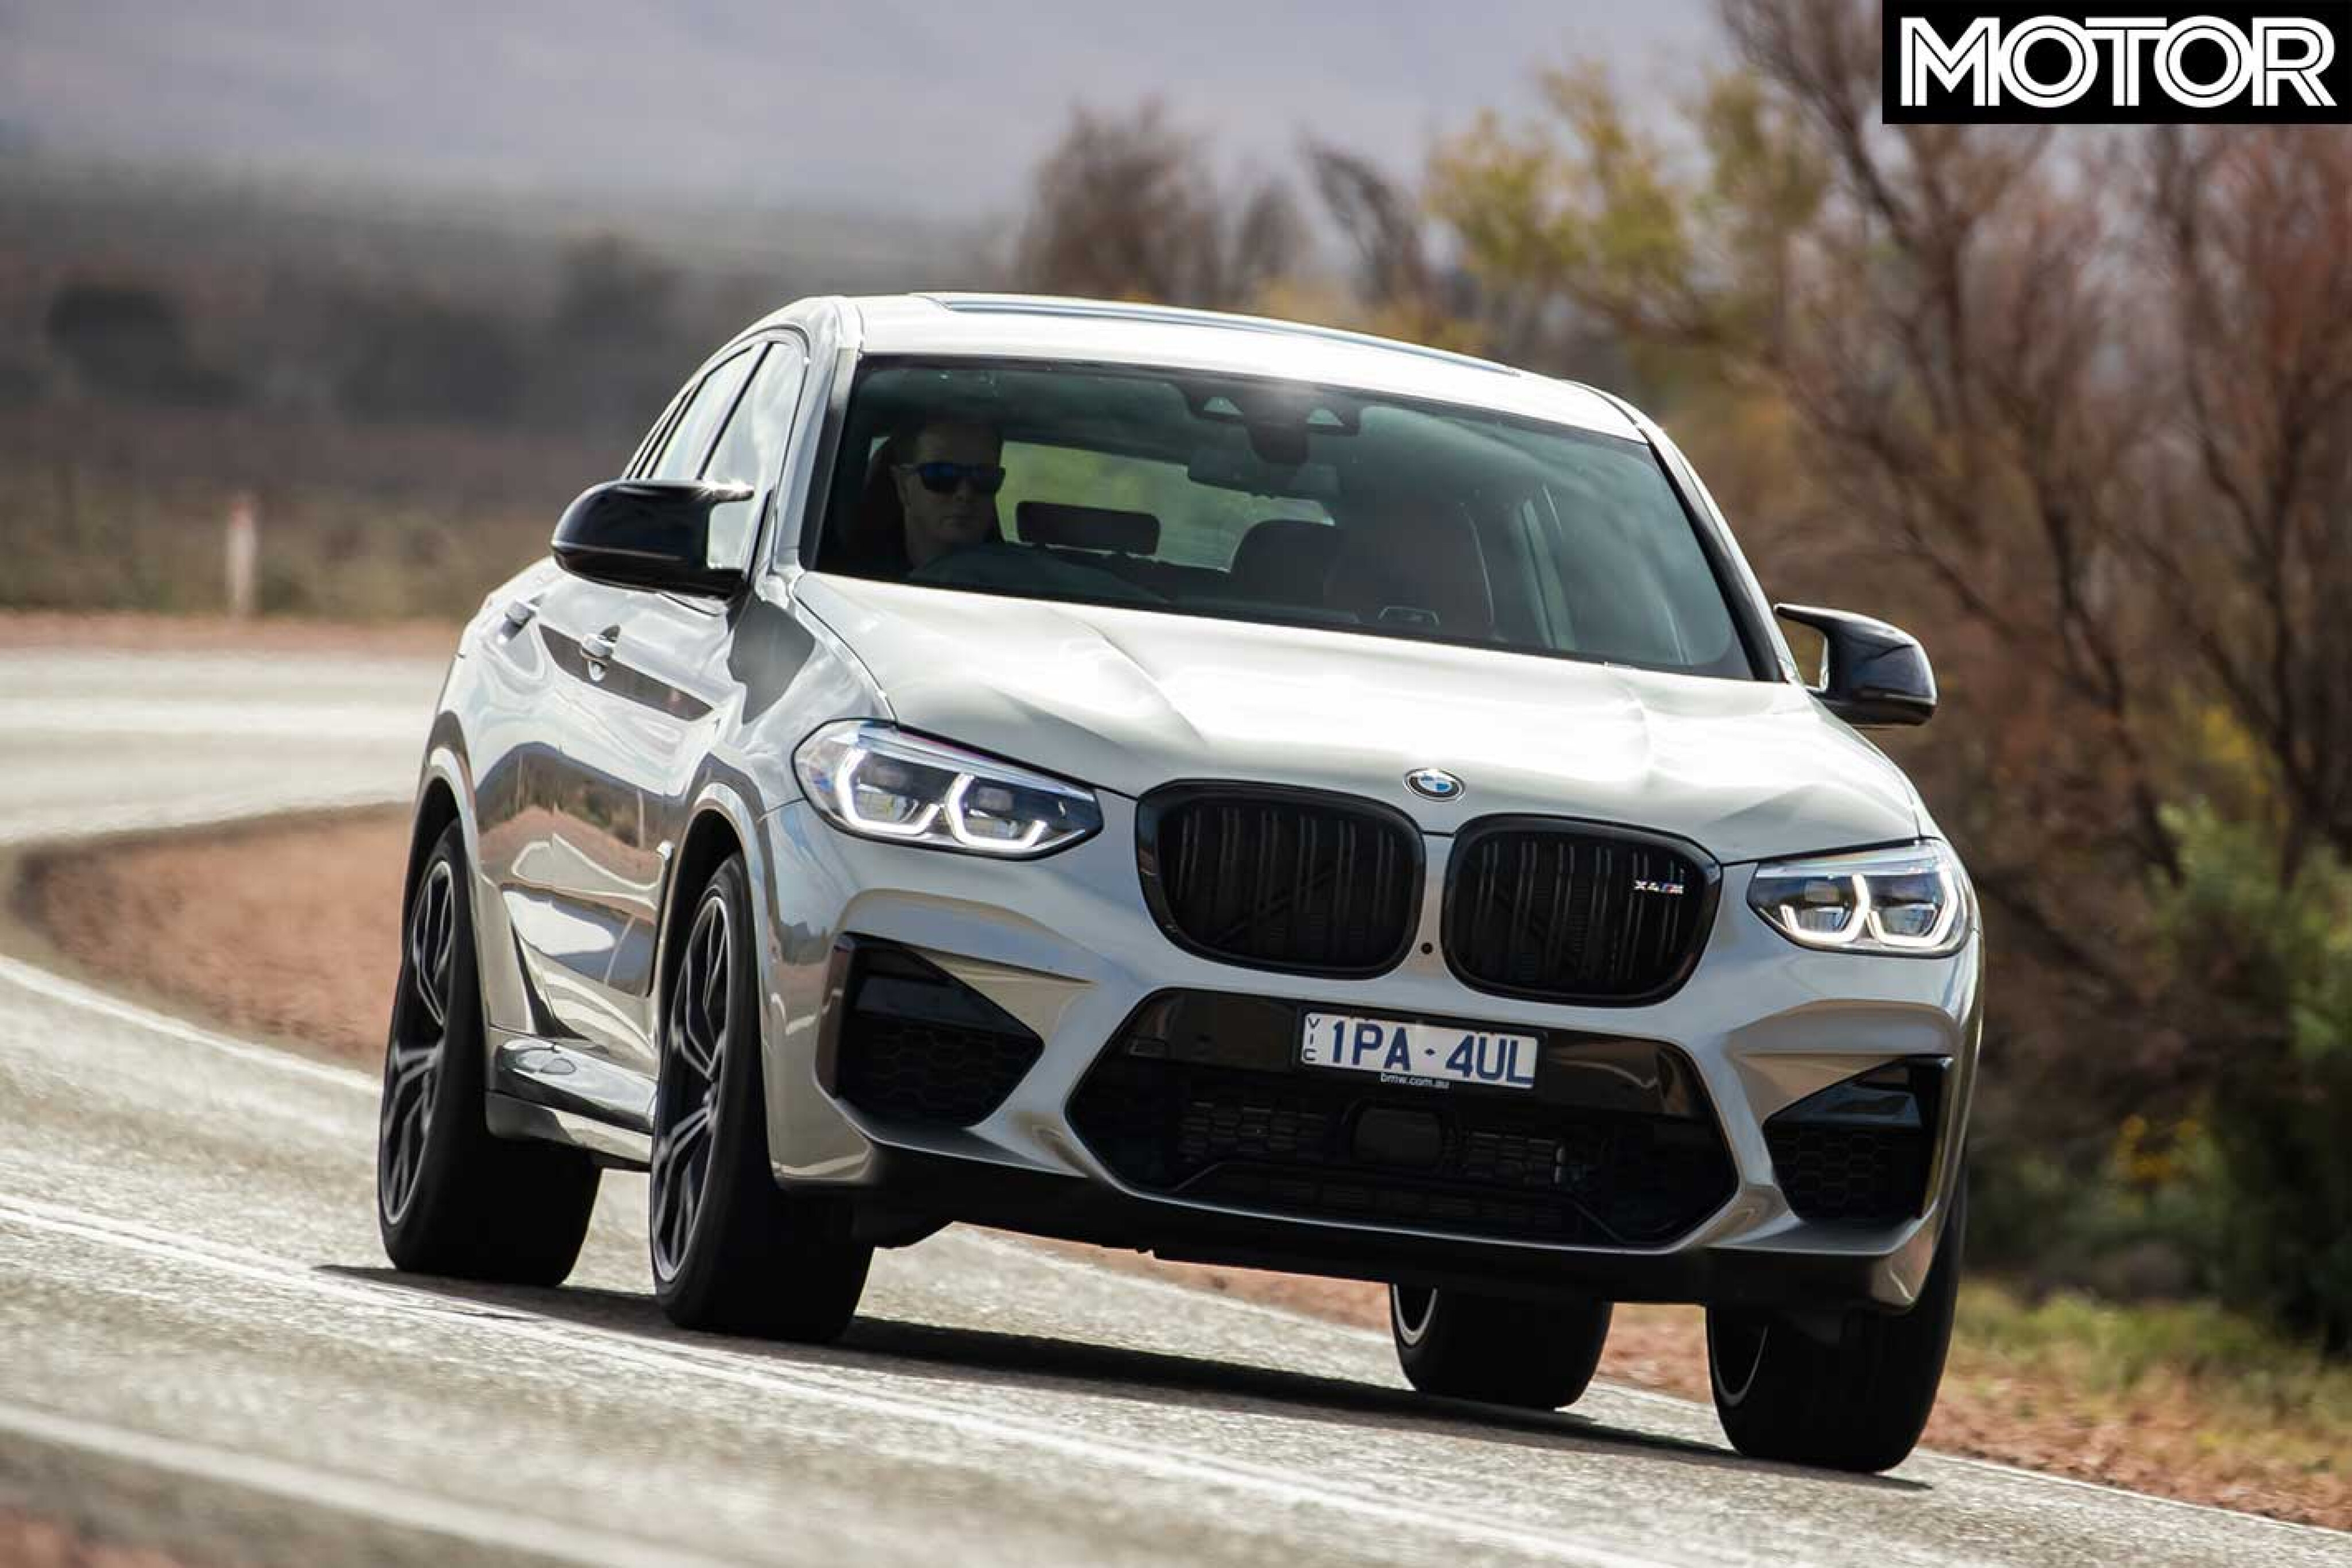 b43f09d8/gallery 2019 bmw x4 m competition front jpg